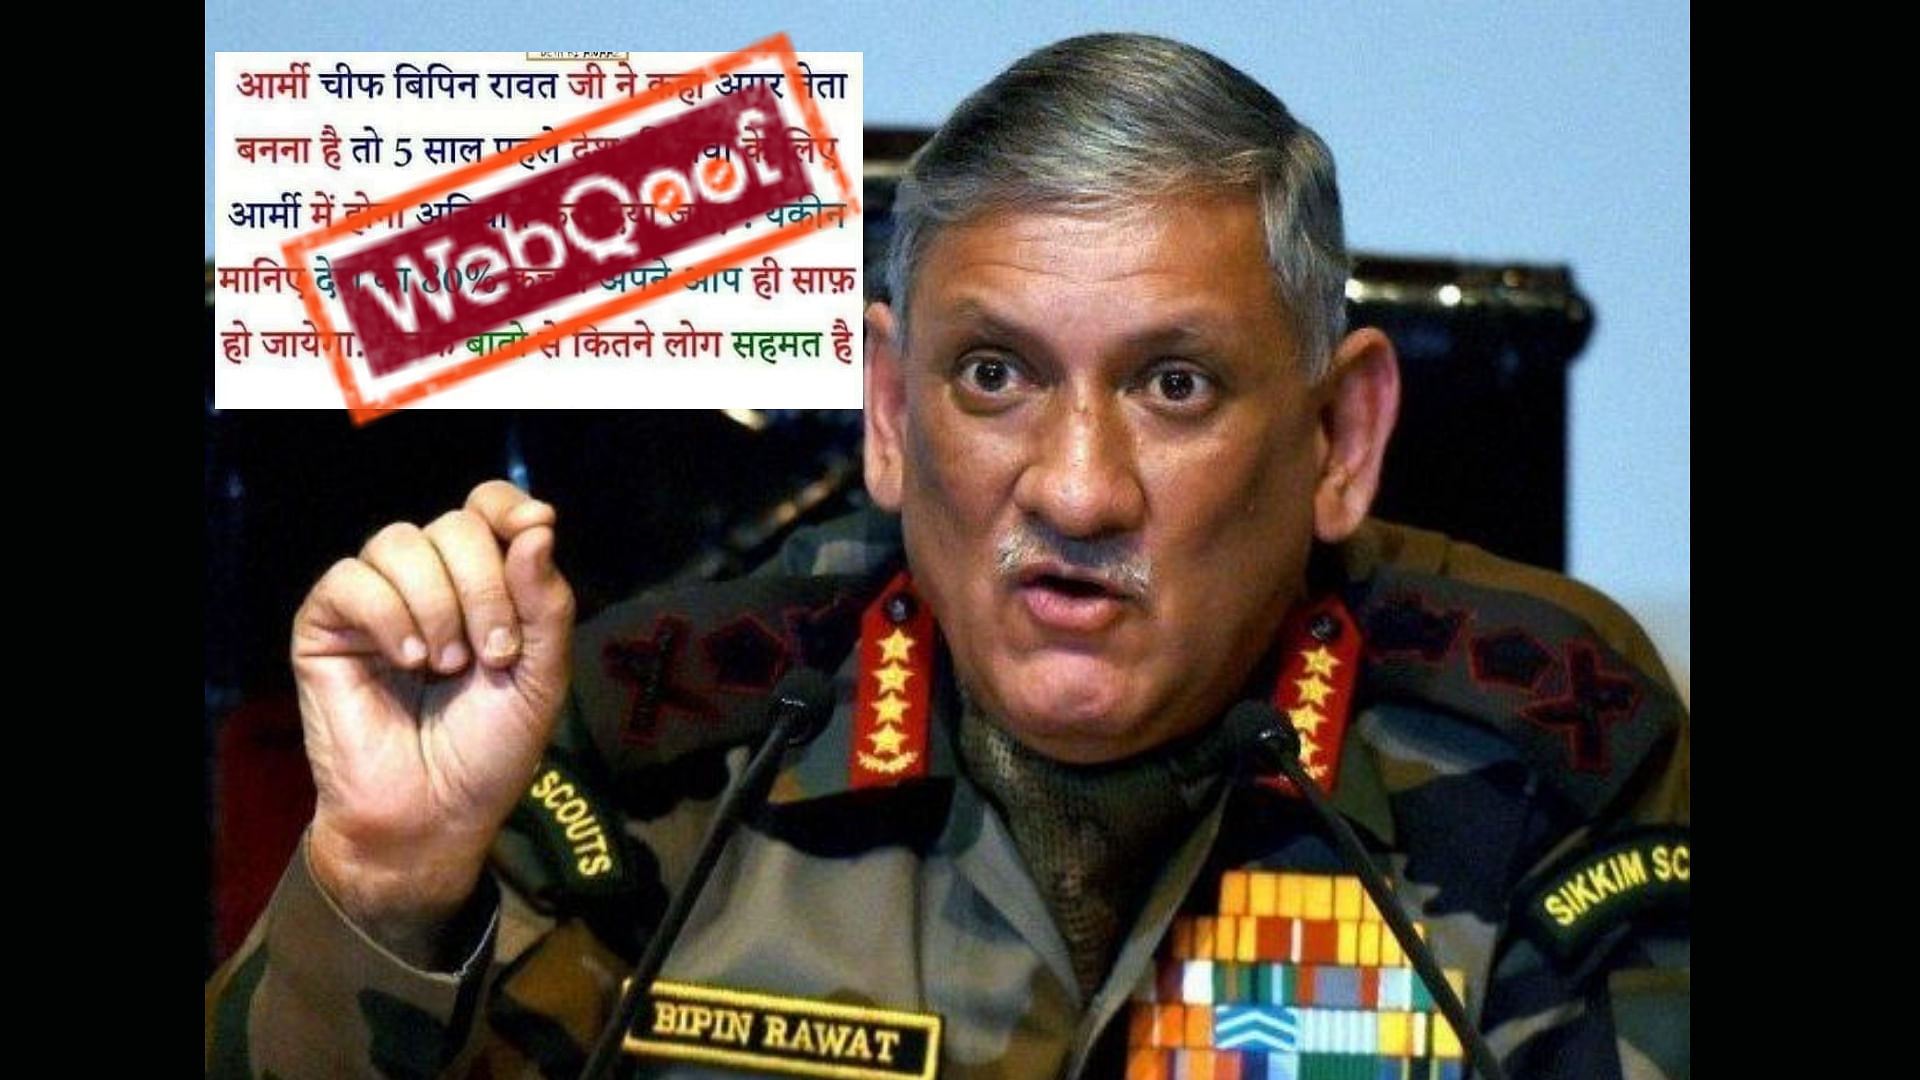 It was stated that some anti-social elements had circulated a false statement ascribed to General Bipin Rawat.